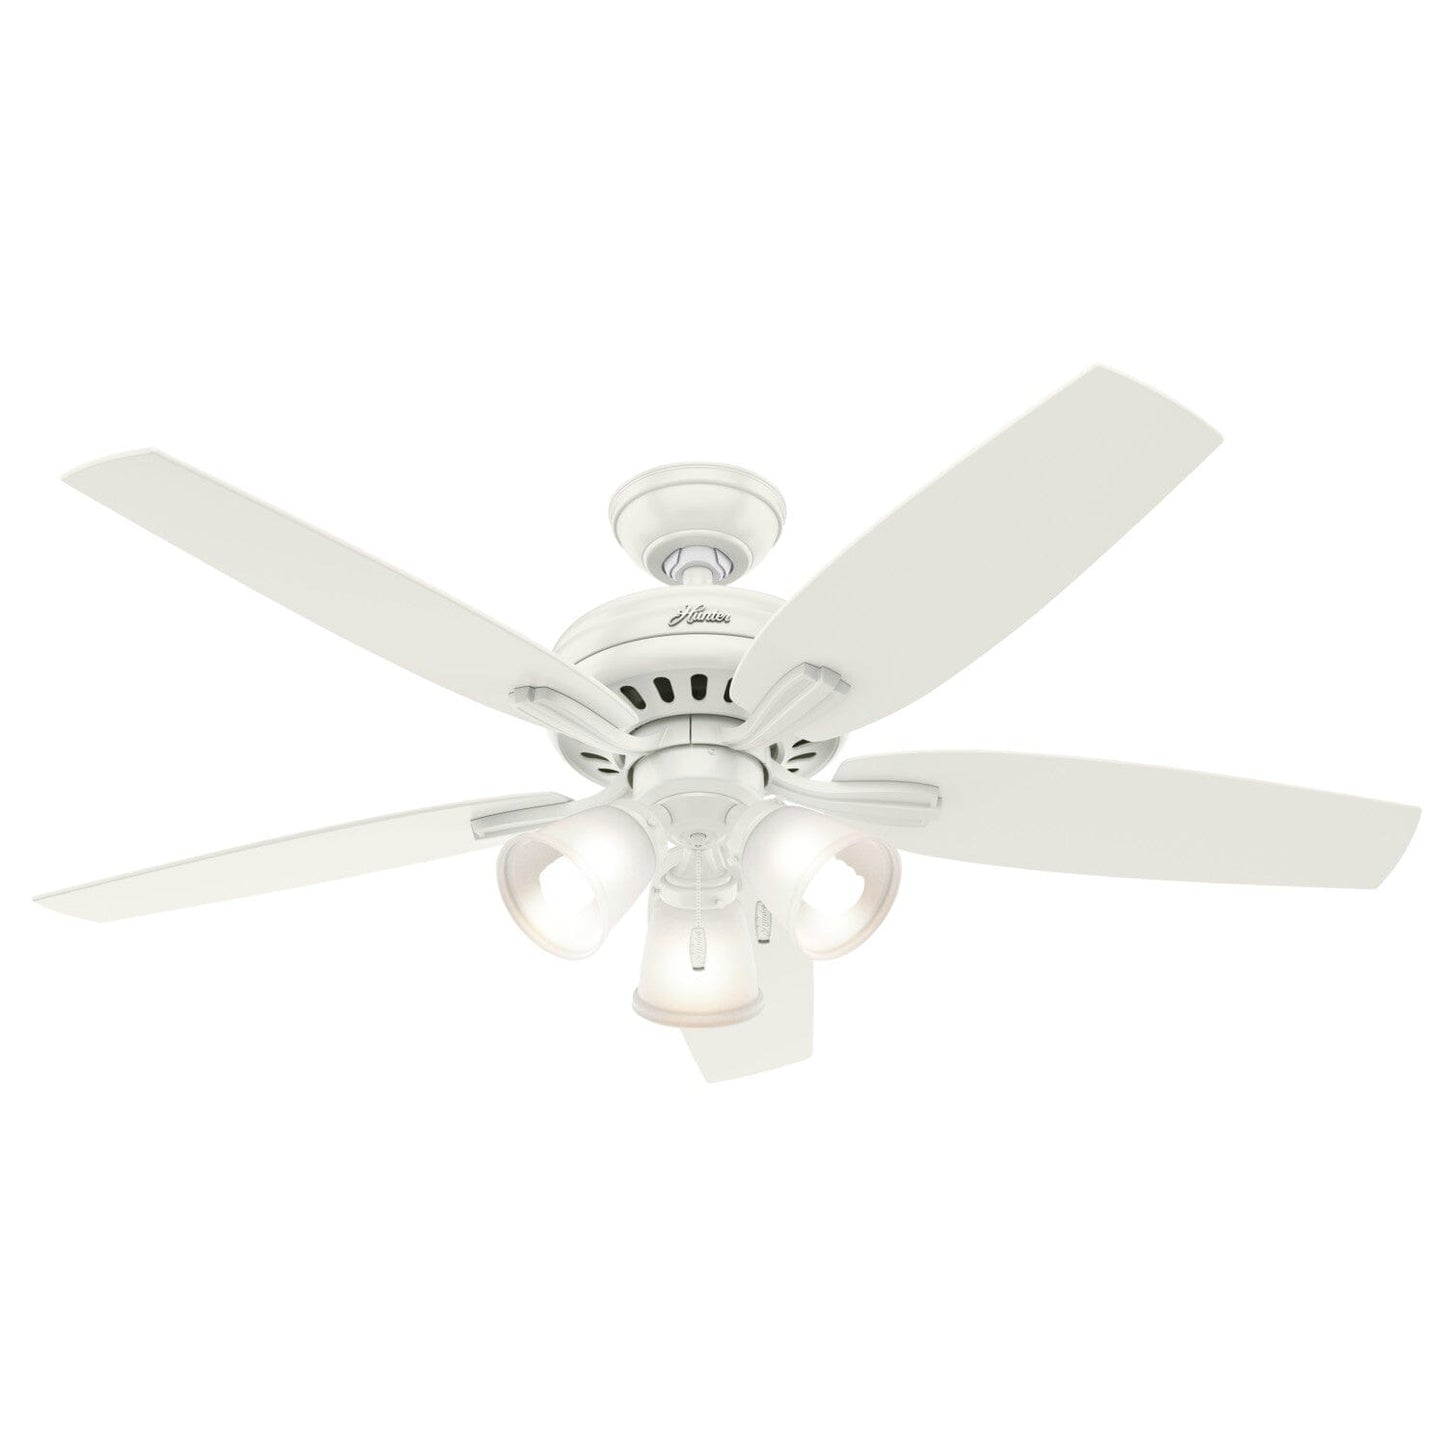 Newsome with 3 Lights 52 inch Ceiling Fans Hunter Fresh White - Fresh White 